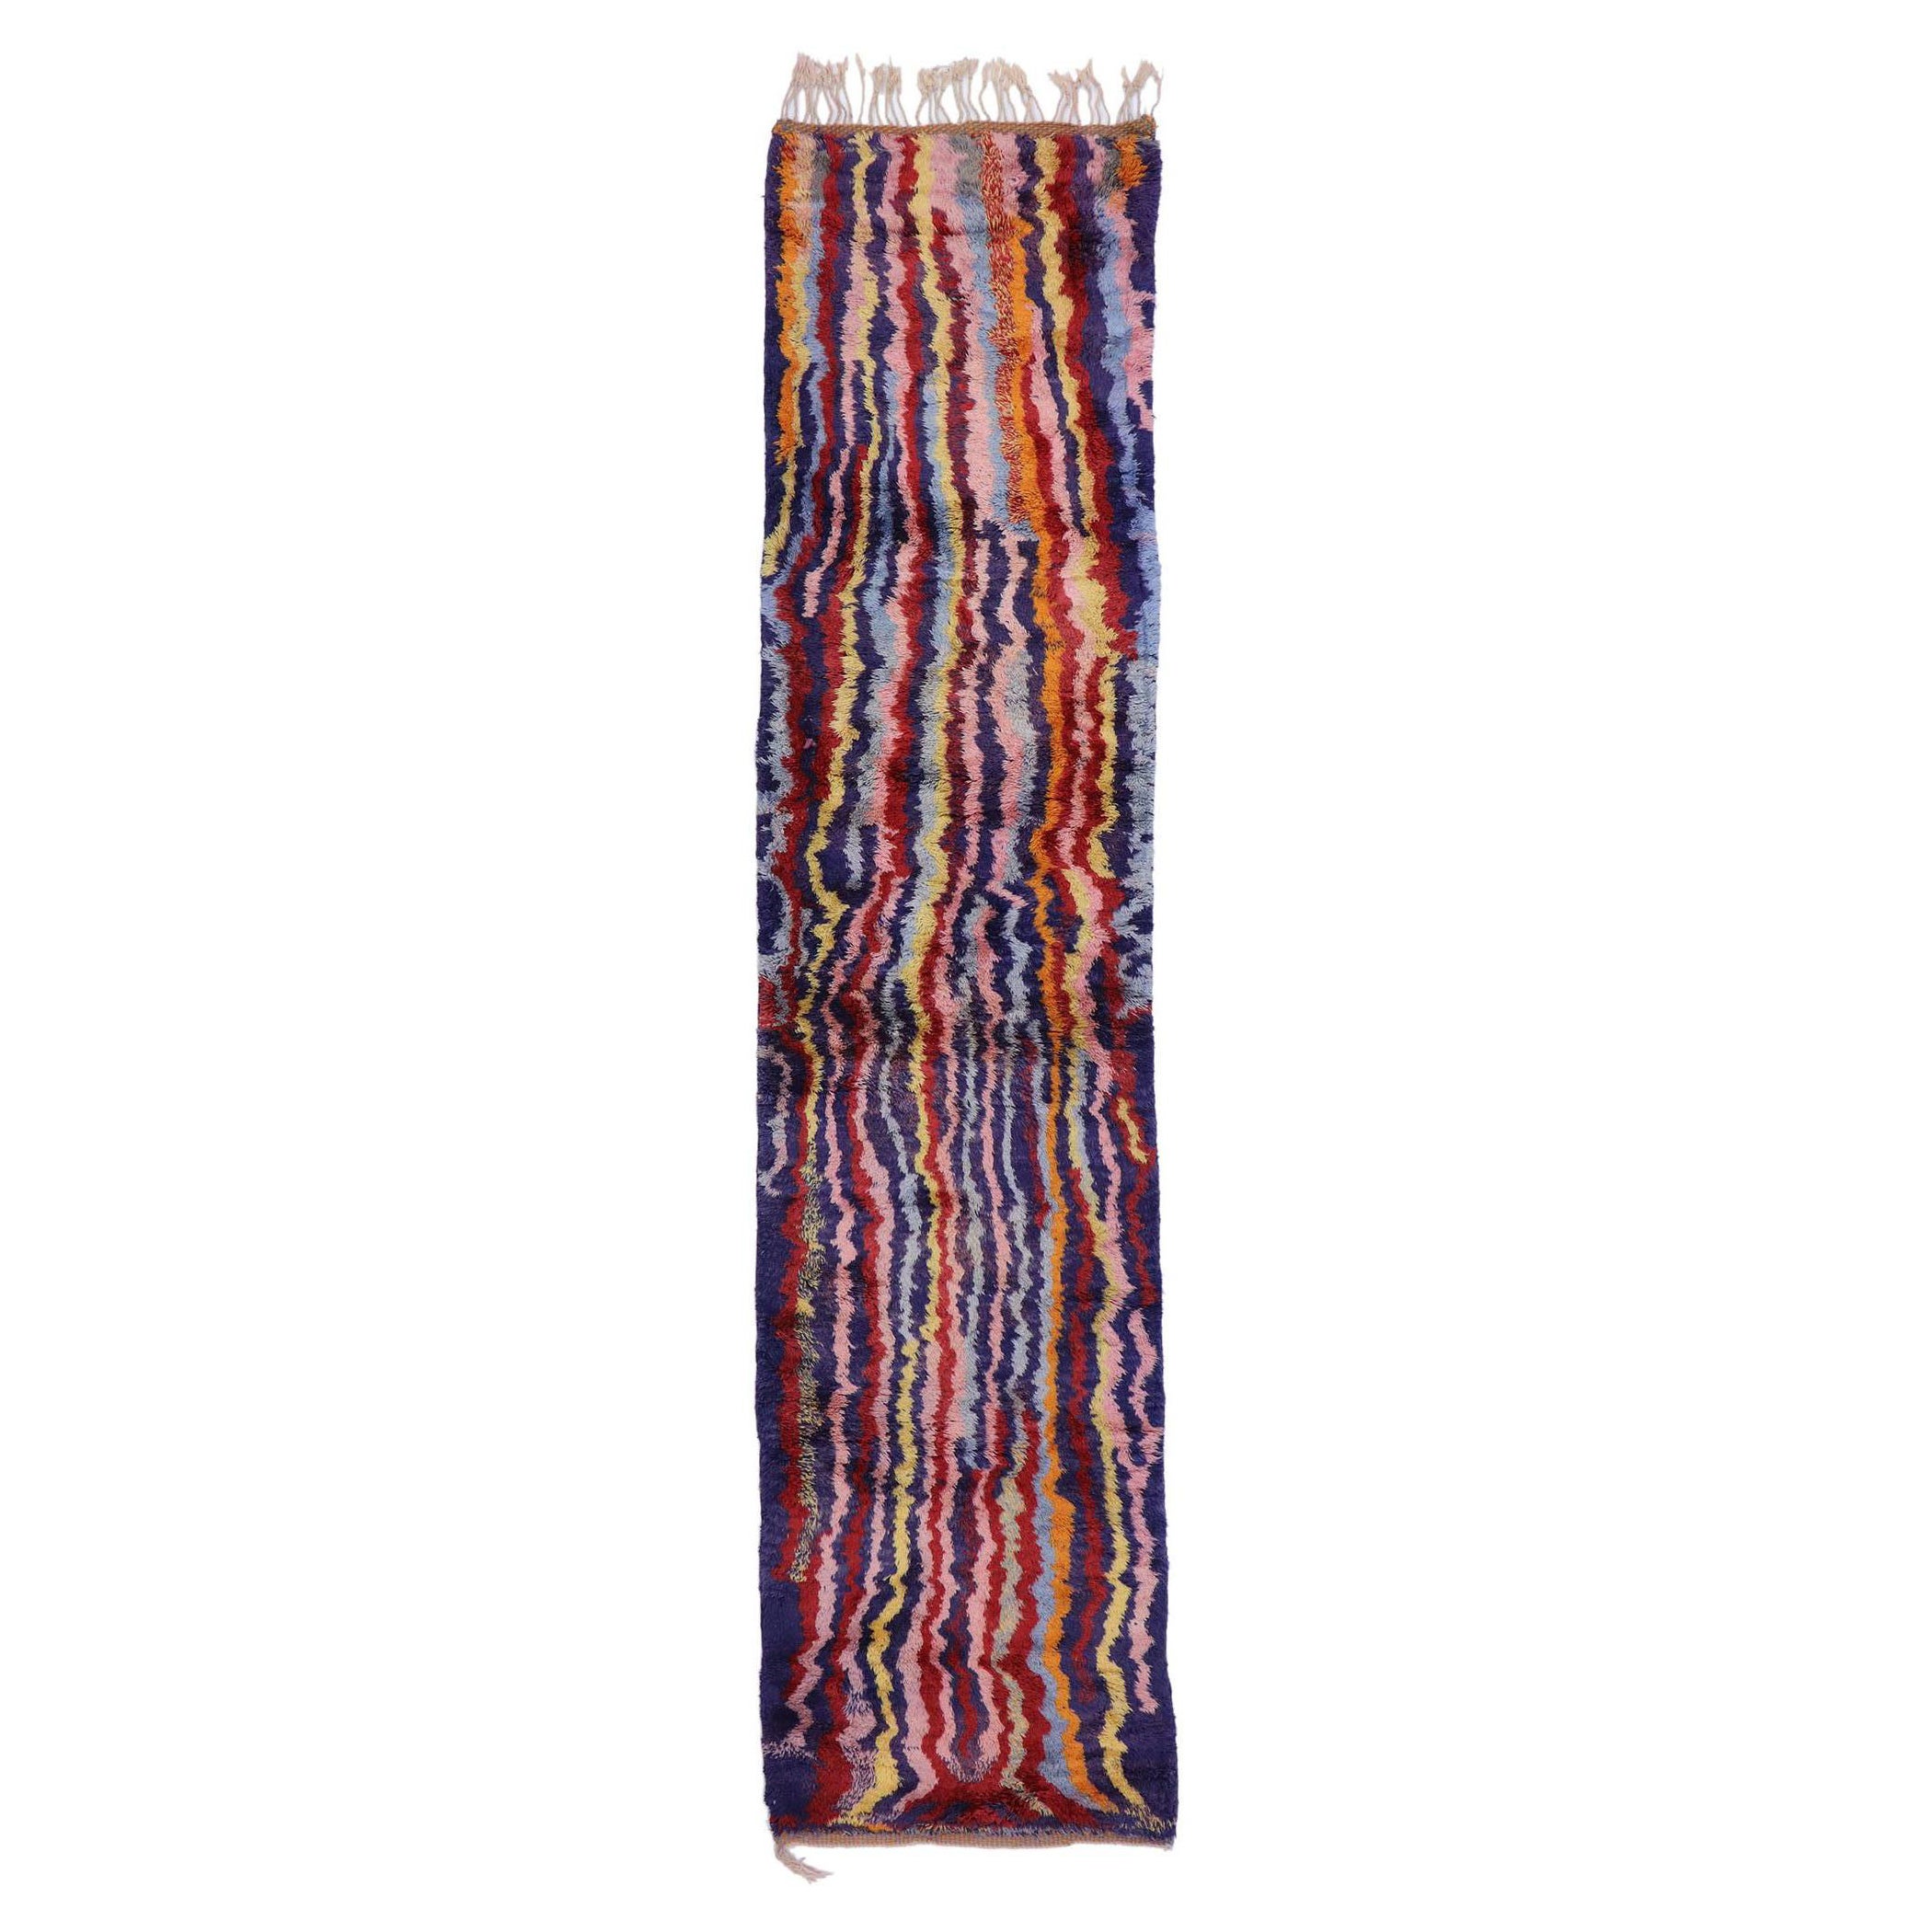 New Contemporary Berber Moroccan Runner with Abstract Expressionist Style